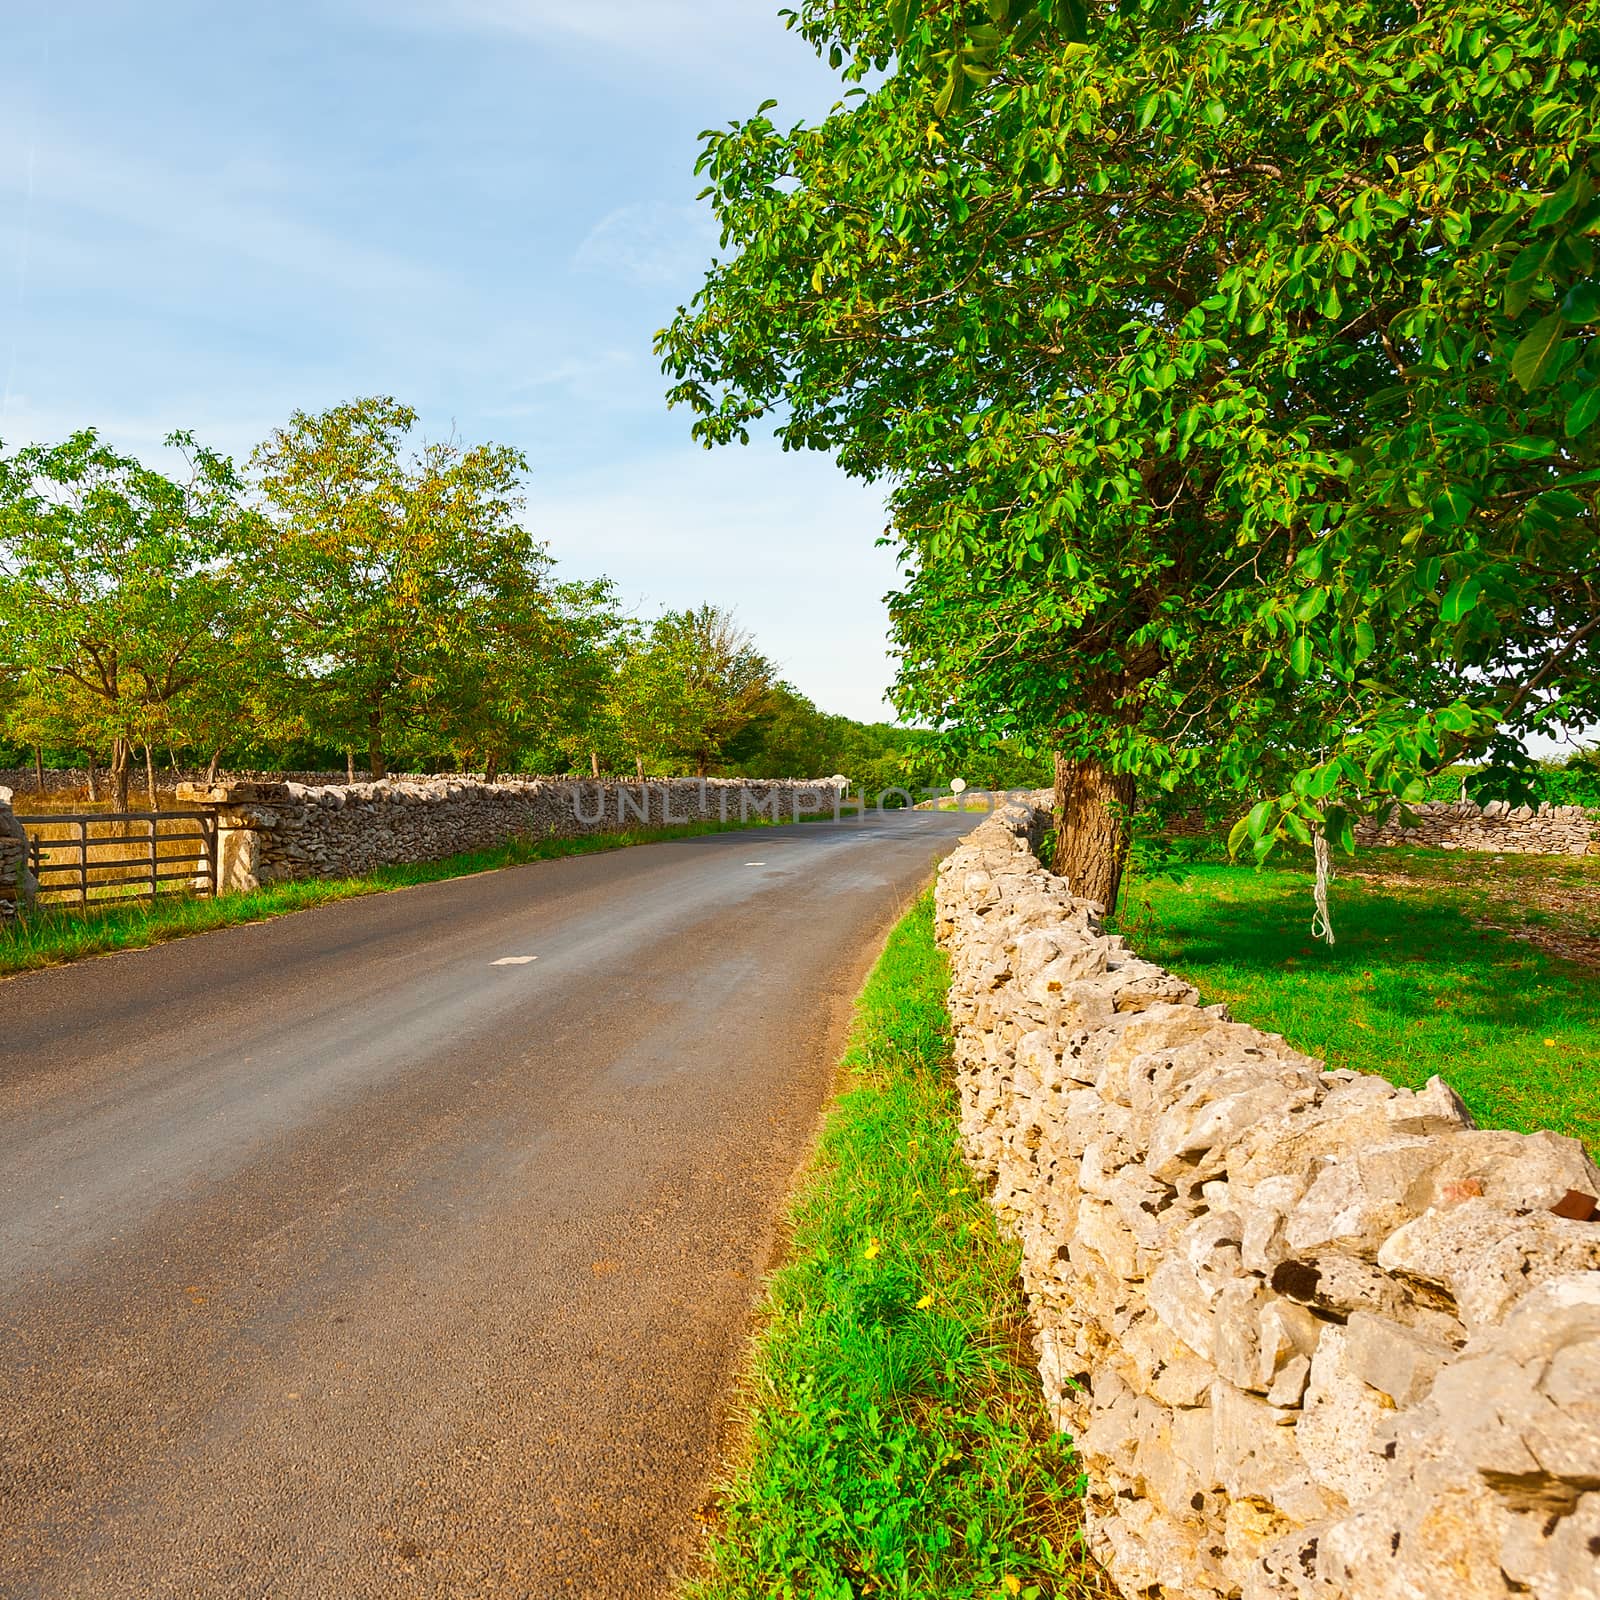 Asphalt Road along the Pasture Divided into Section by the Stone Wall